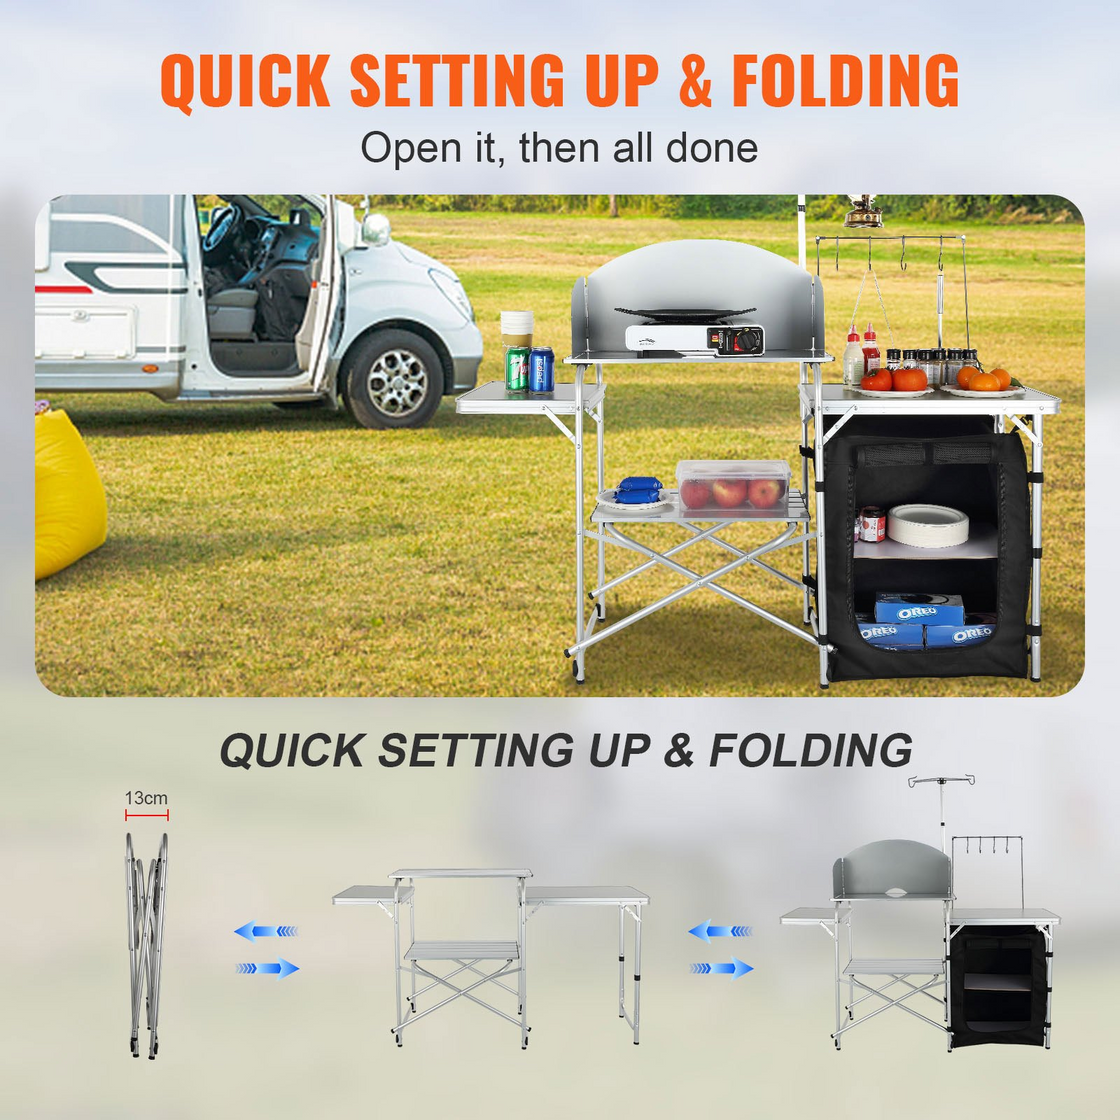 VEVOR Camping Kitchen Table, Folding Outdoor Cooking Table with Storage Carrying Bag, Aluminum Cook Station 1 Cupboard & Detachable Windscreen, Quick Set-up for Picnics, BBQ, RV Traveling, Black